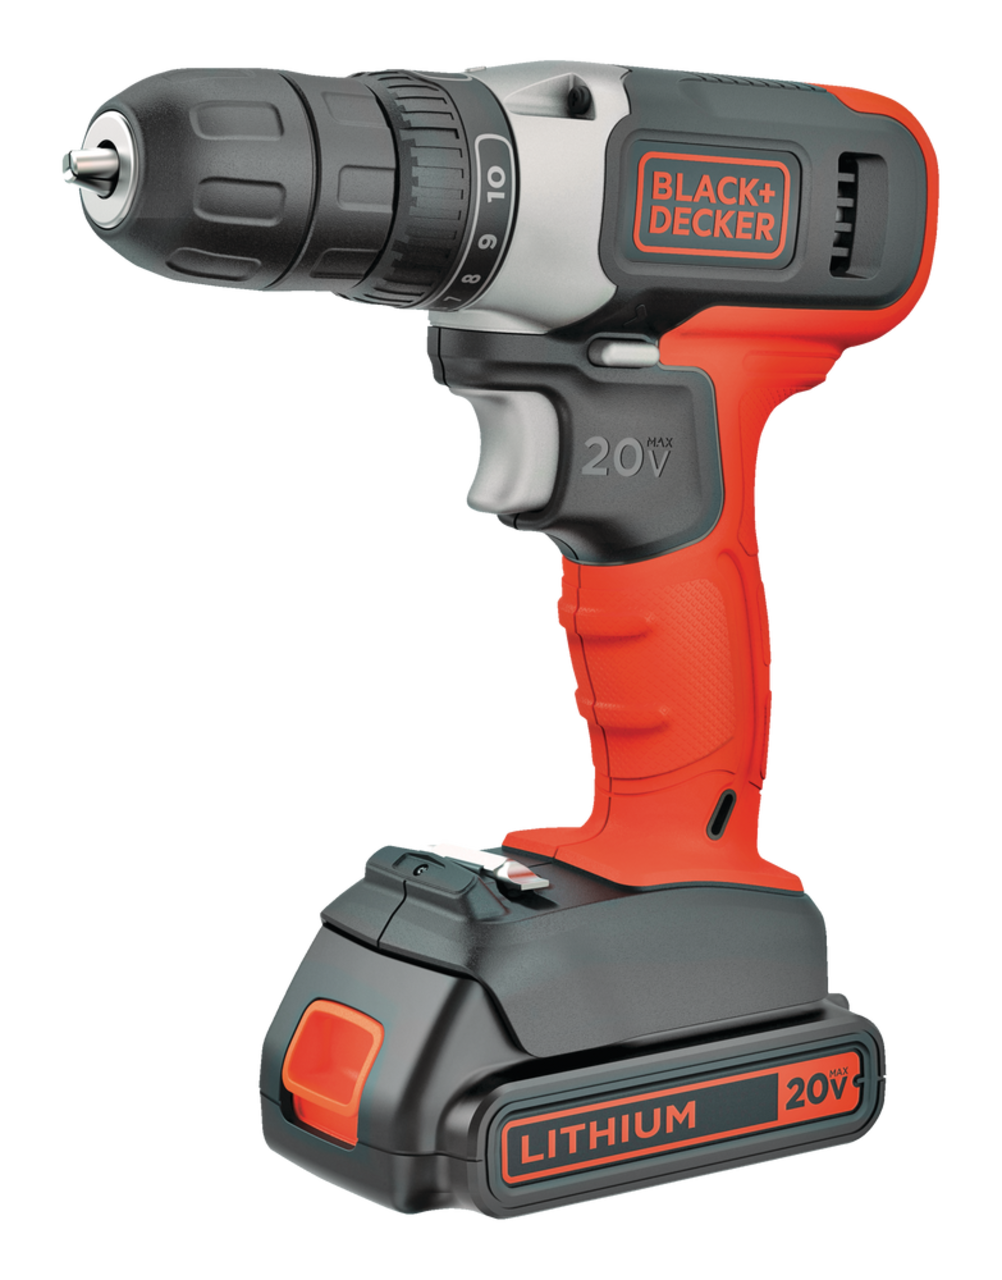 https://media-www.canadiantire.ca/product/fixing/tools/portable-power-tools/3994924/black-and-decker-20v-max-cordless-drill-driver-2778fd98-a2f4-446c-b7cd-dd3333d9a5ea.png?imdensity=1&imwidth=640&impolicy=mZoom